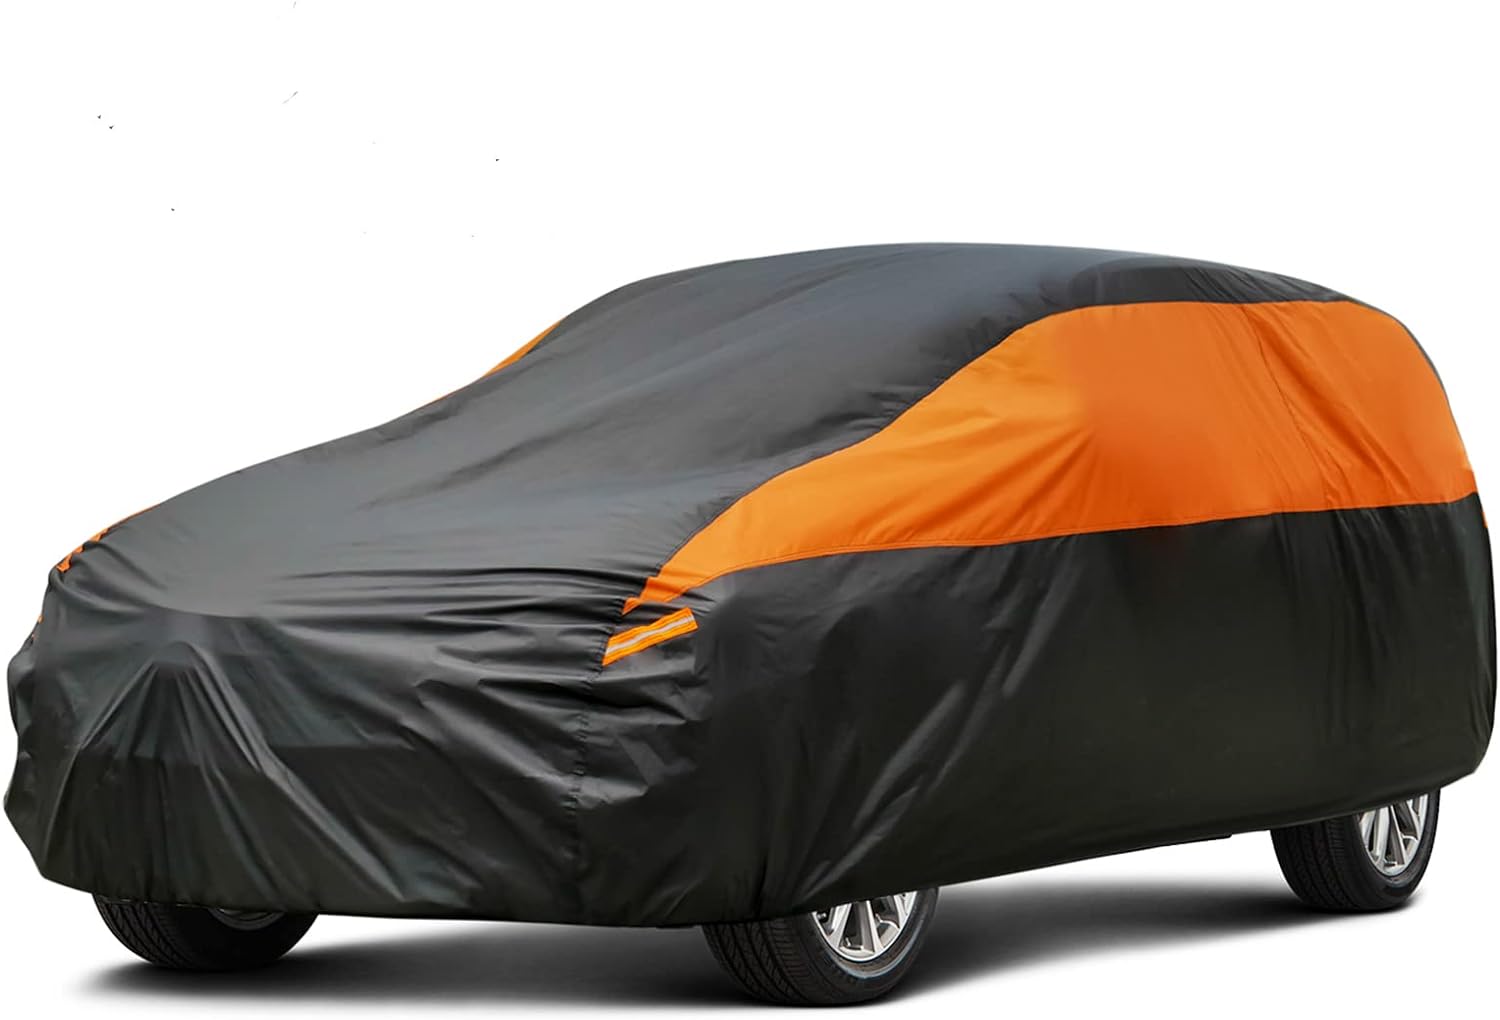 I am using these to cover up my two project cars. They are skinny compared to my other expensive car covers. They are priced well, and I would recommend them for temporary covers. They are not very durable, but they do the job as a waterproof car cover.I will update this after 6 months on how they are holding up.